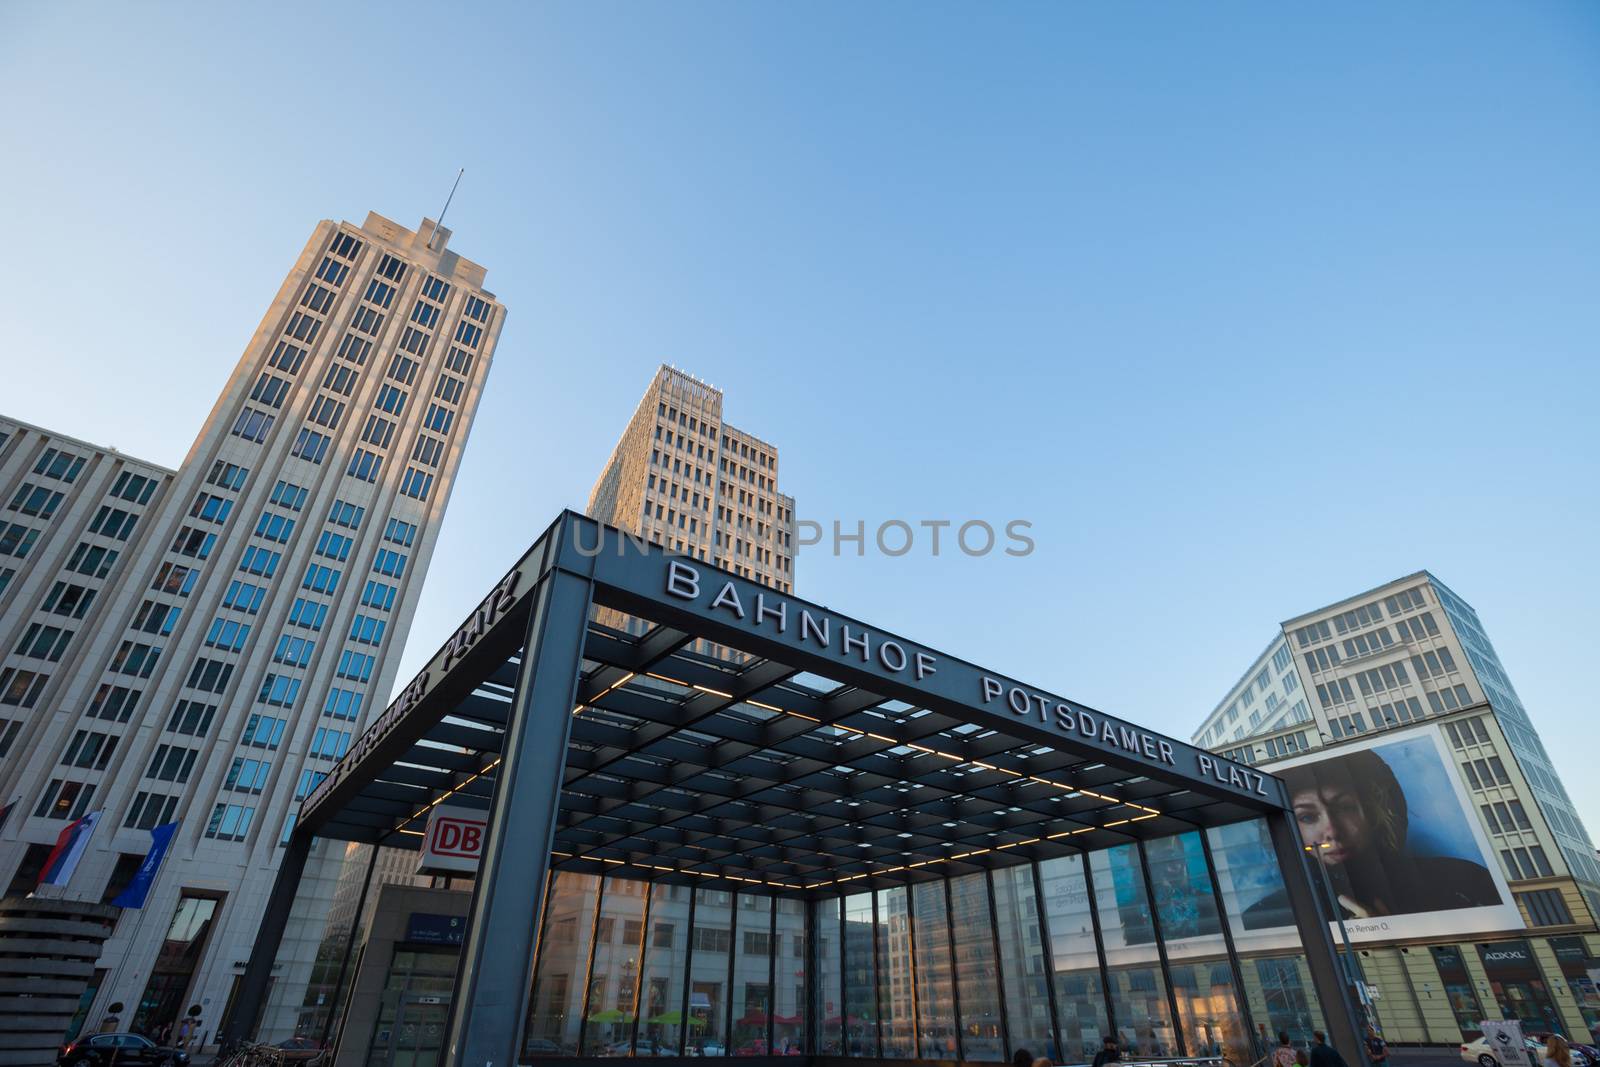 BERLIN - May 10: Station building and skyscrapers at Potsdamer Platz on May 10, 2016 in Berlin.